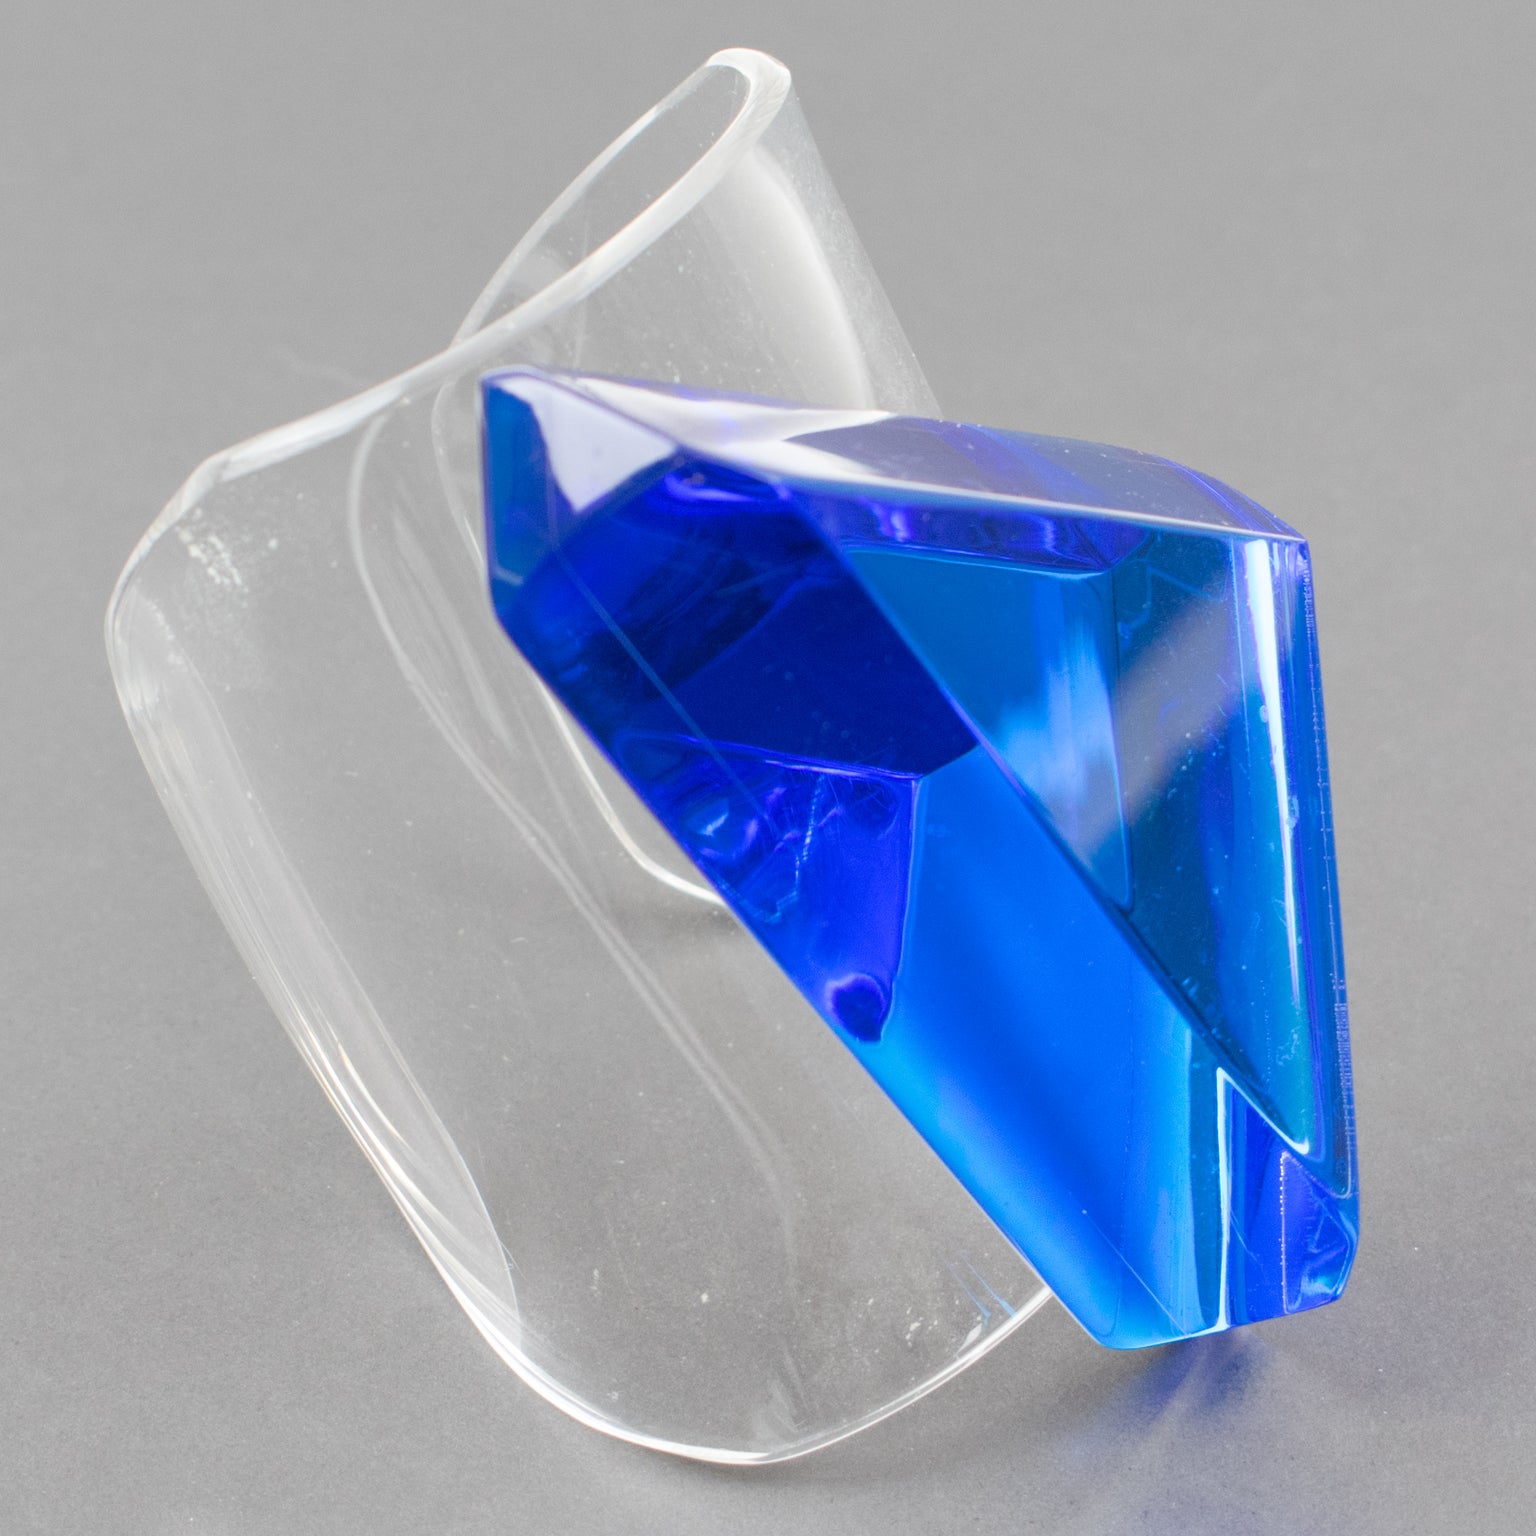 A striking Lucite cuff bracelet designed by Harriet Bauknight for Kaso. Clear Lucite oversized rigid cuff shape topped with large geometric ornament. The Lucite ornament features a dimensional geometric faceted large triangle in intense blue lagoon